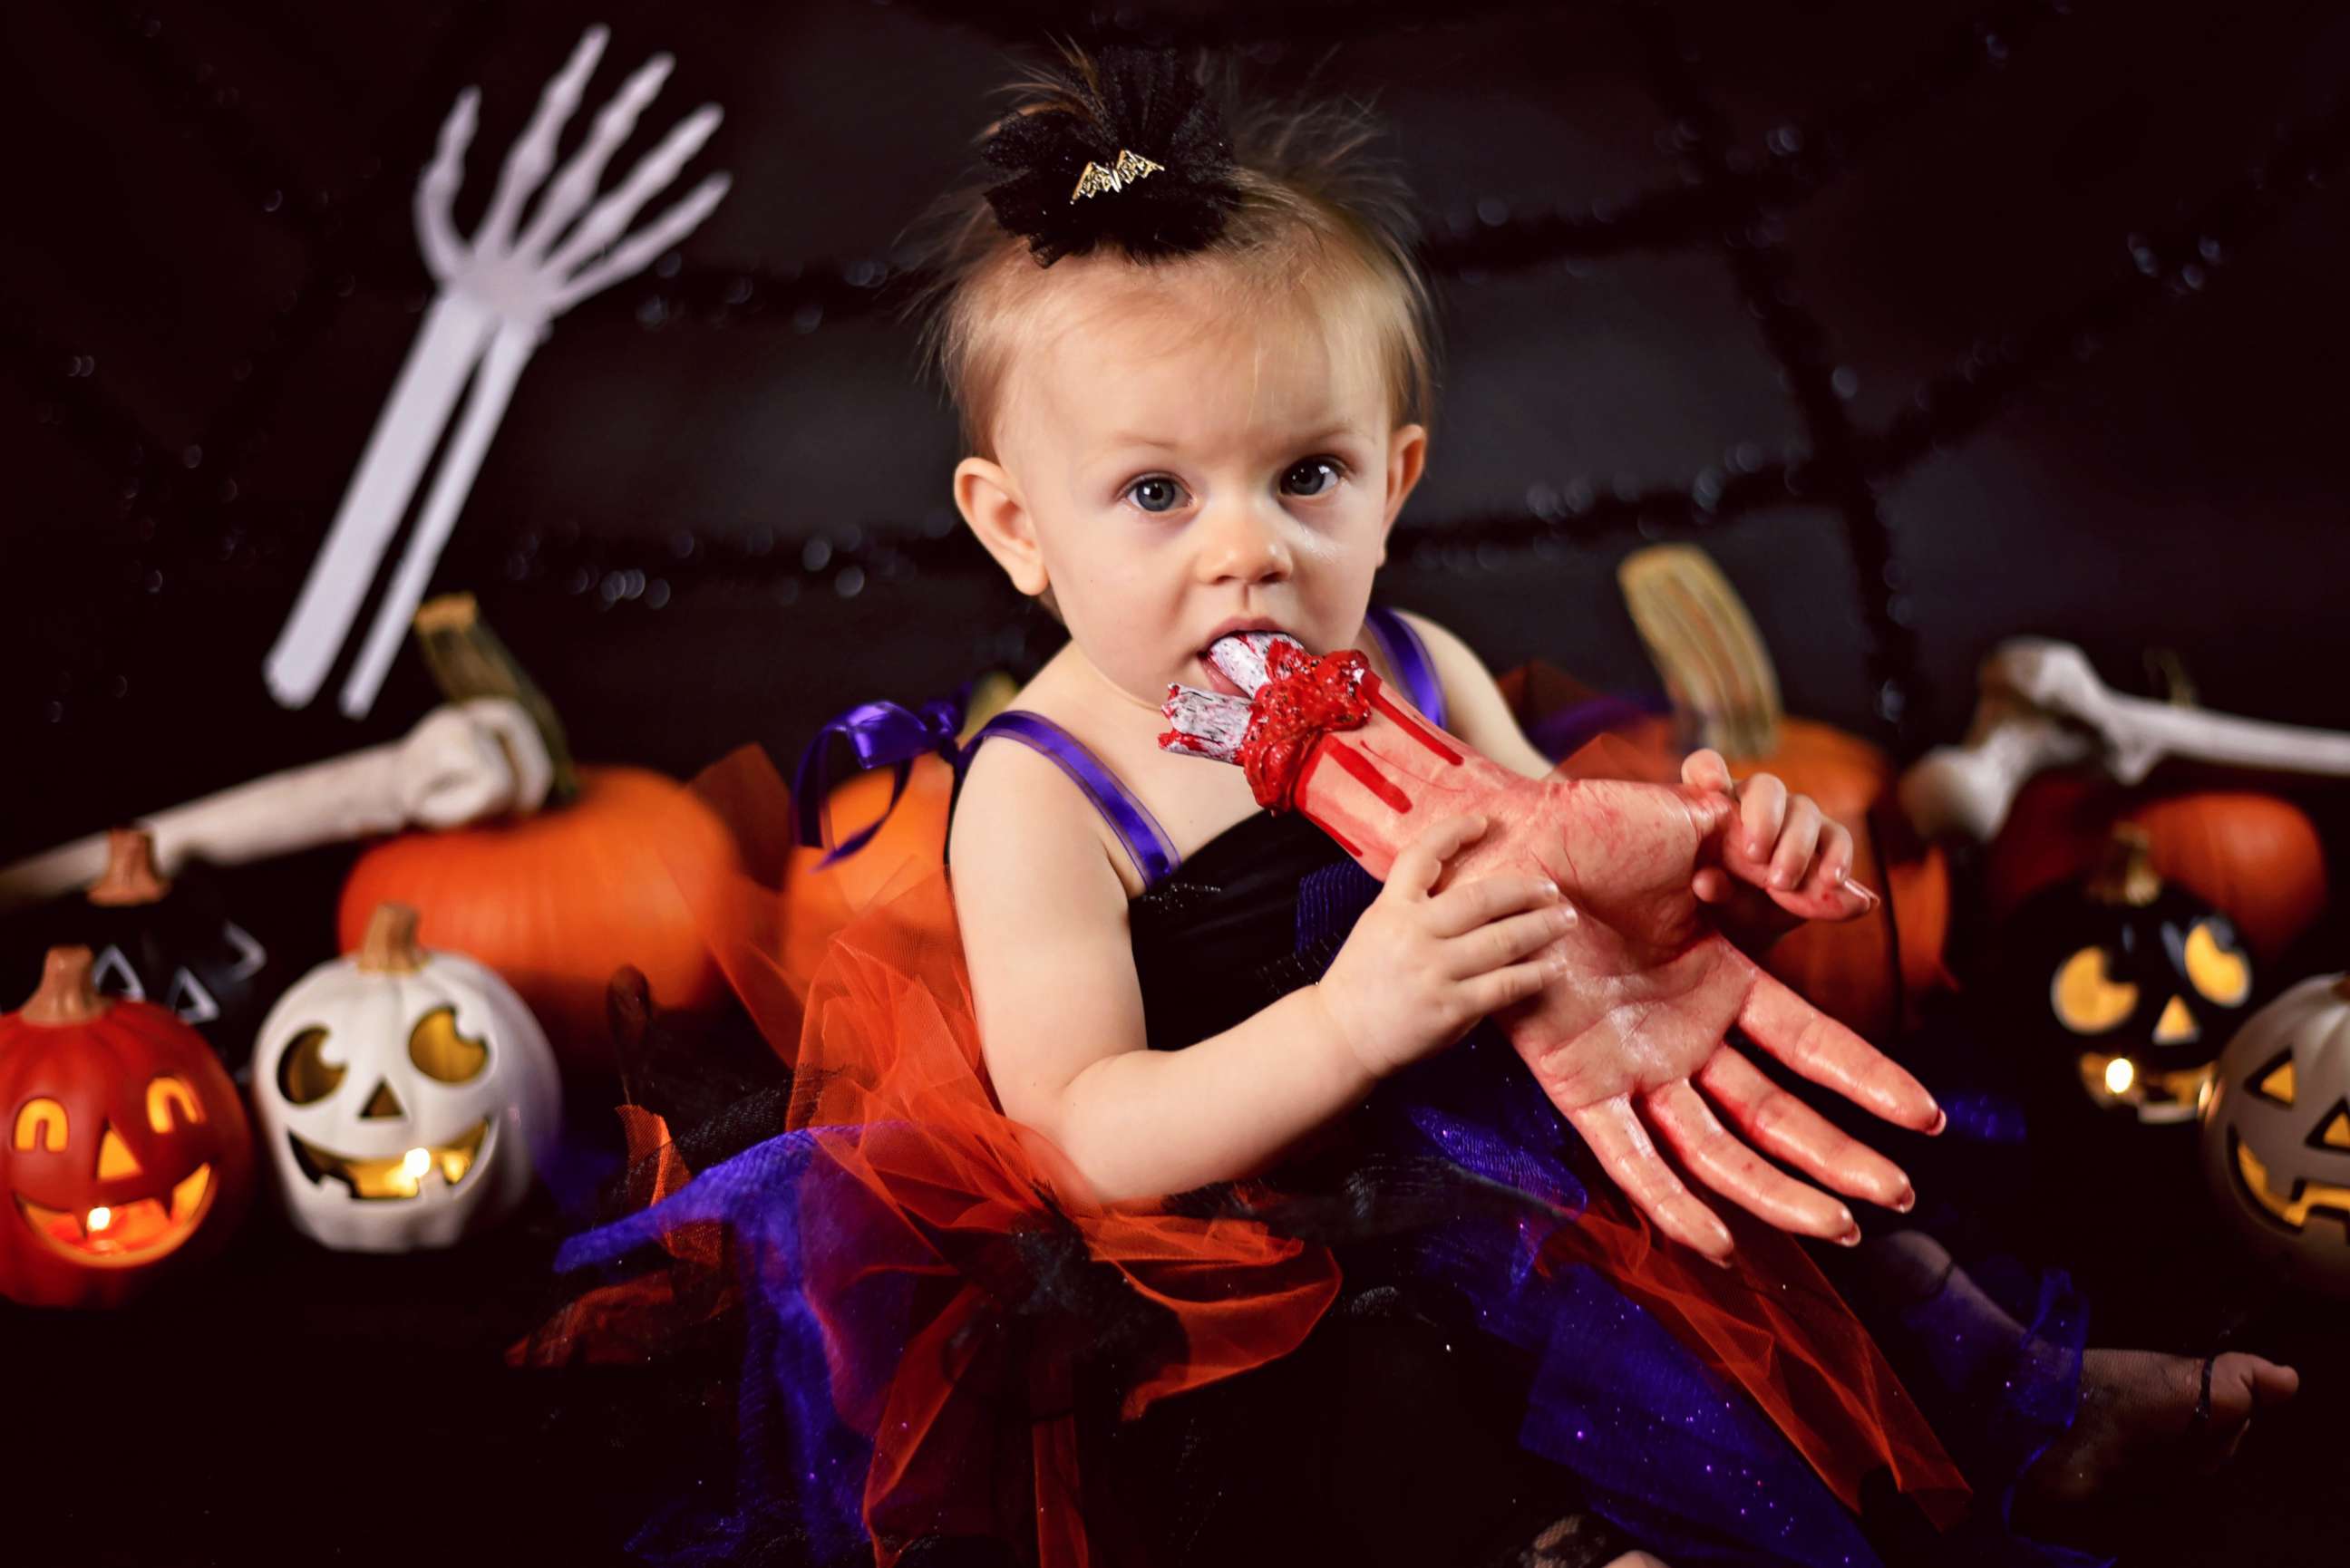 PHOTO: Sydney's favorite part of the creepy decorations was the bloody hand, her mom said.